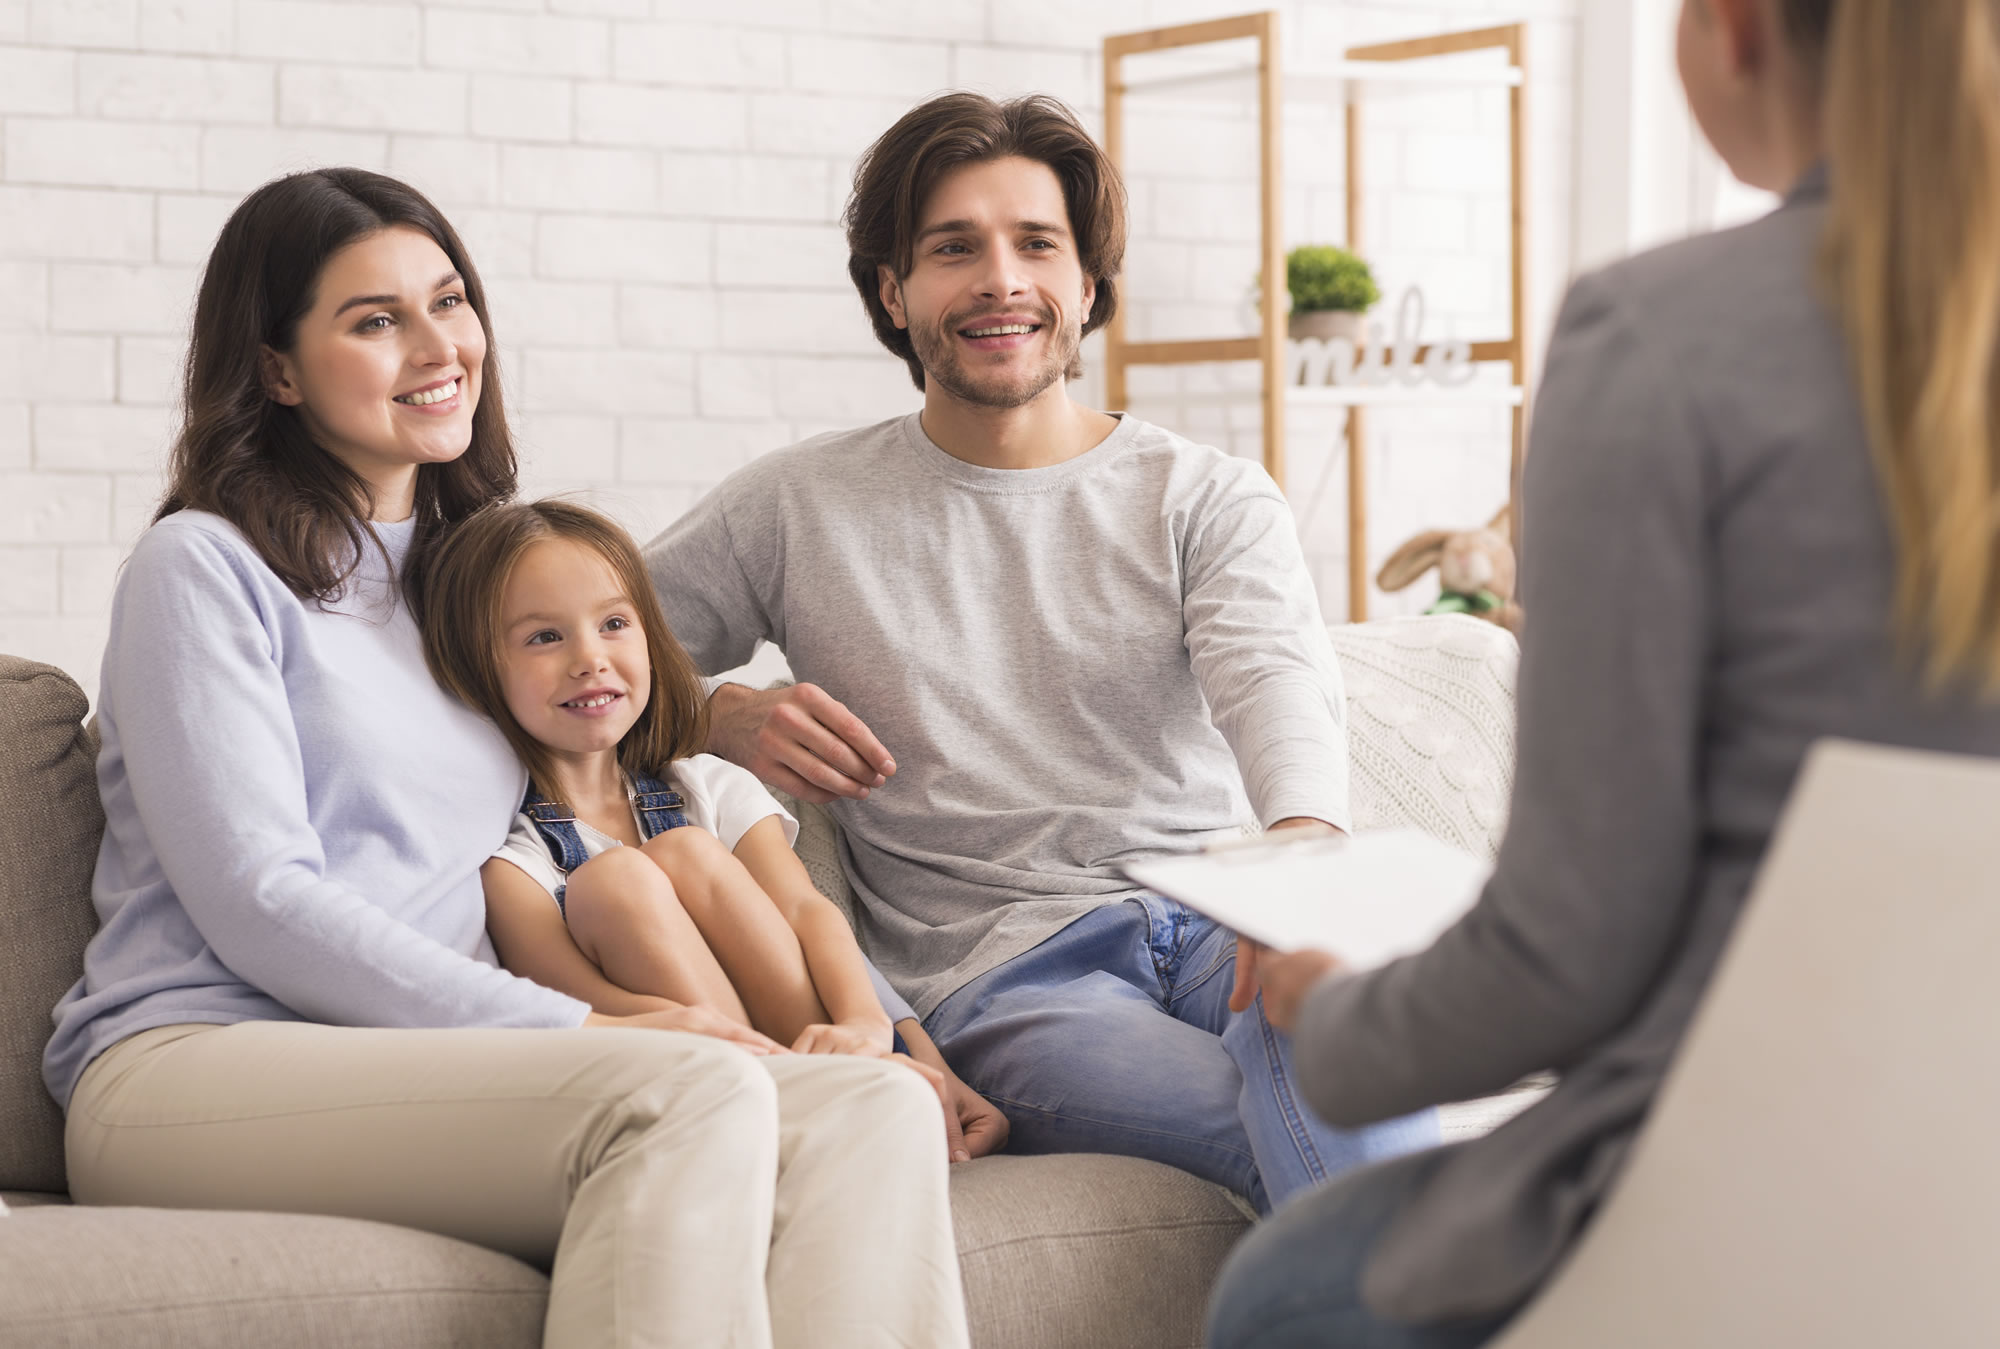 Family therapy in family law